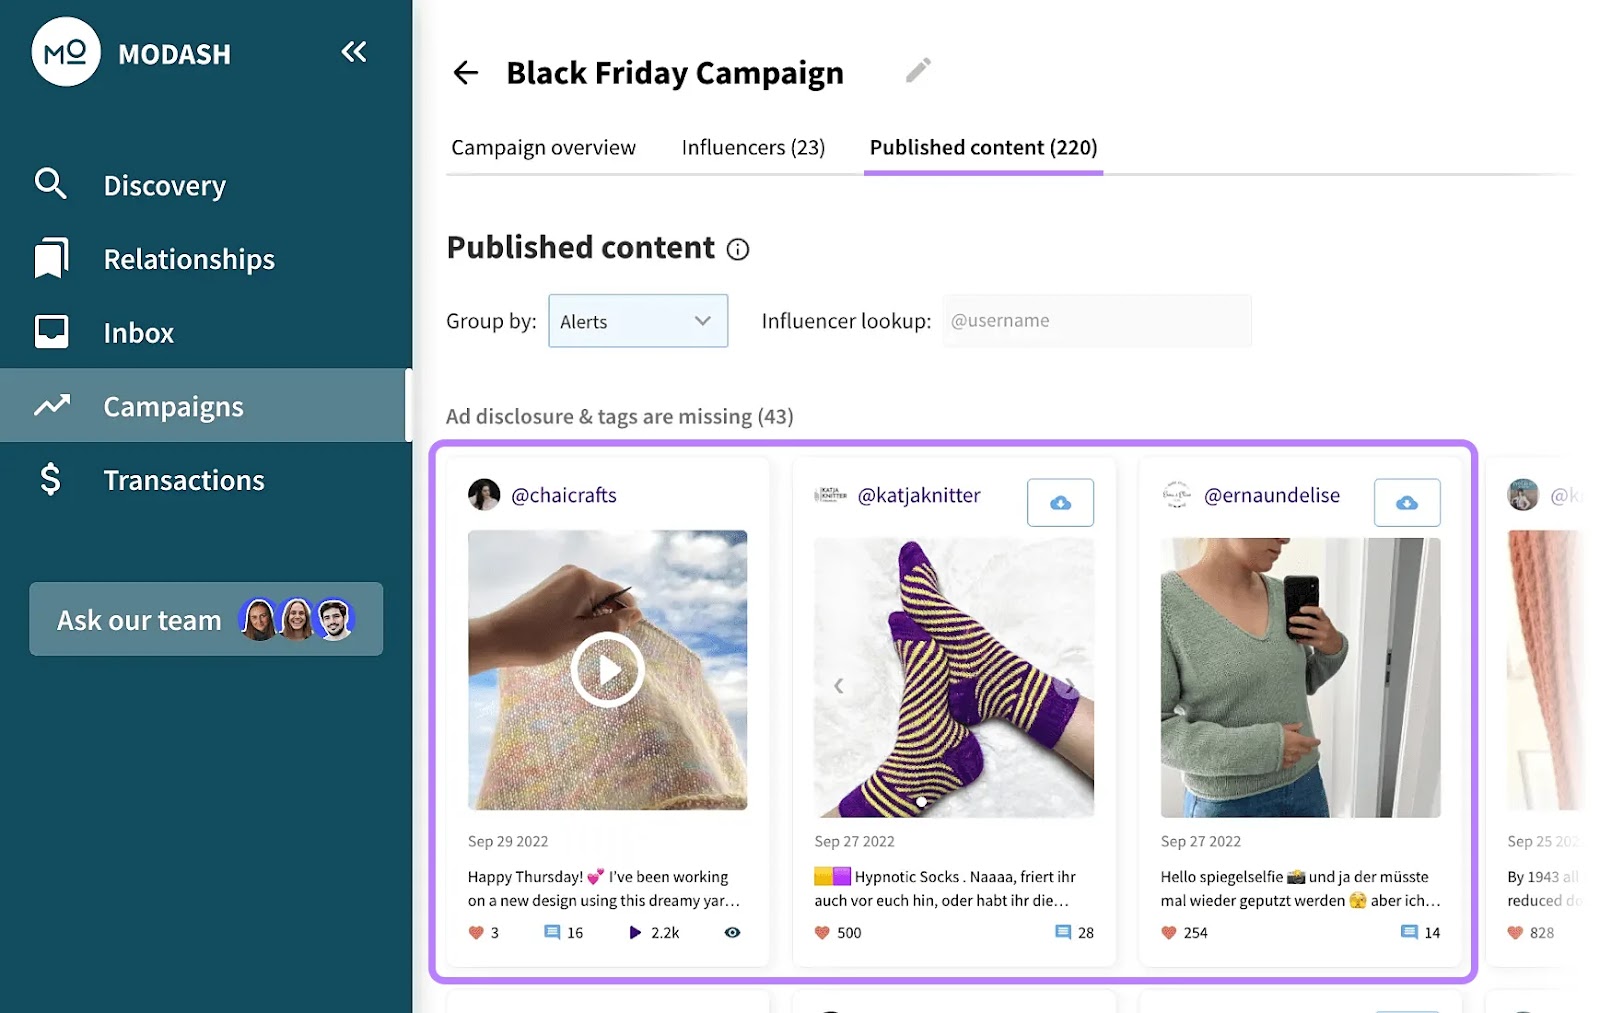 influencer content related to Black Friday campaign shown on Modash's dashboard